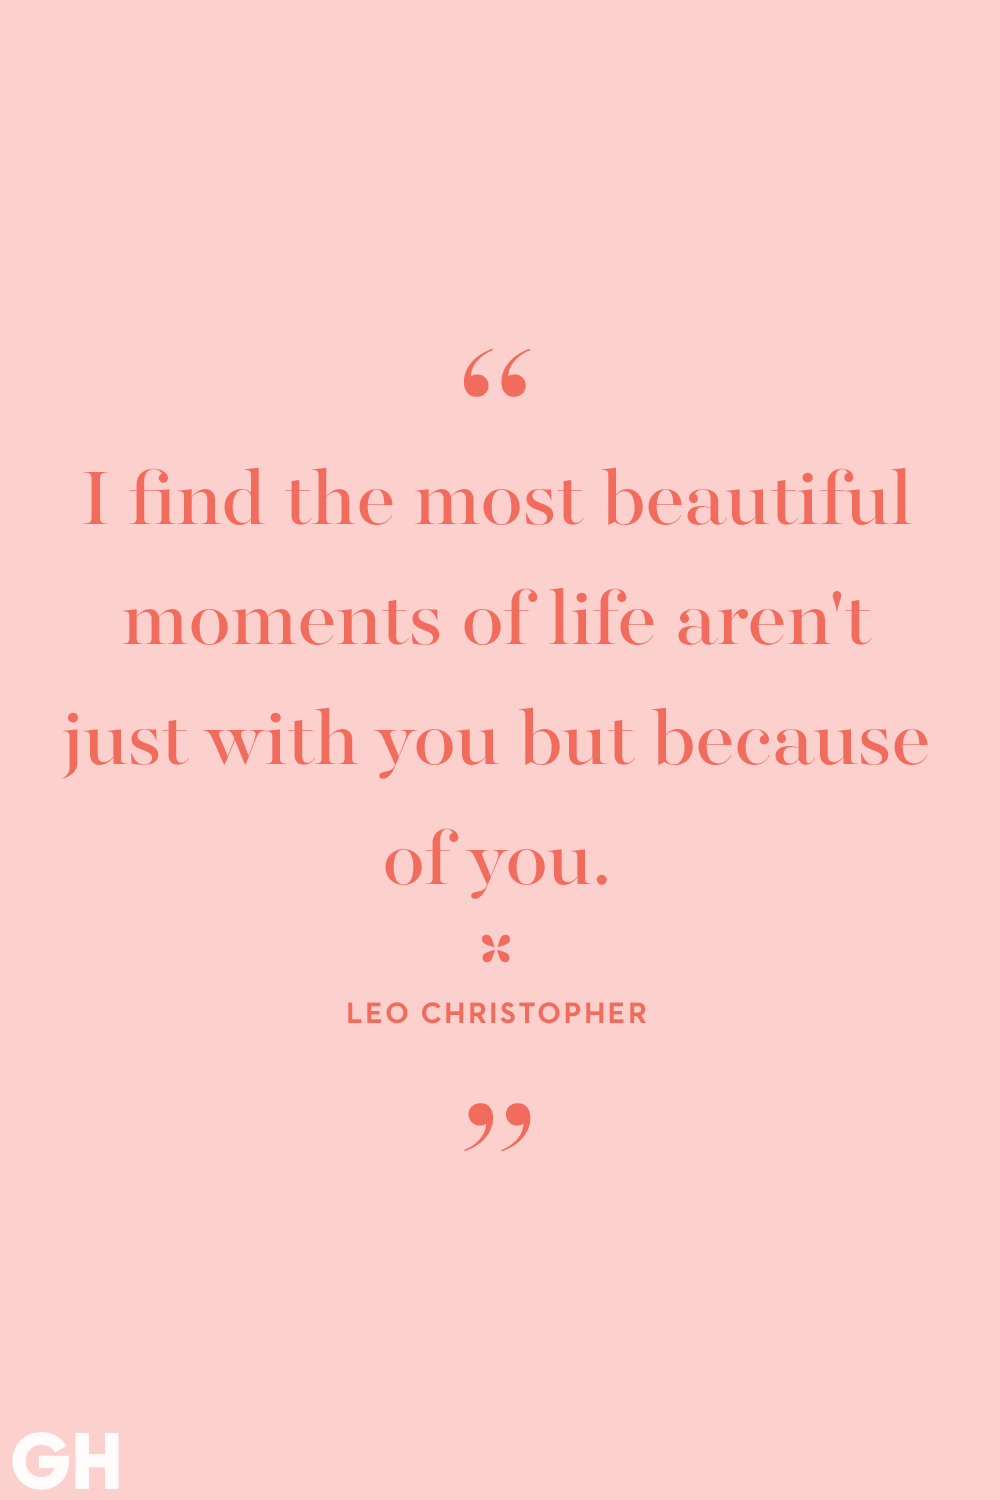 90 Best Love Quotes For Her - Romantic Quotes For Wife Or Gf